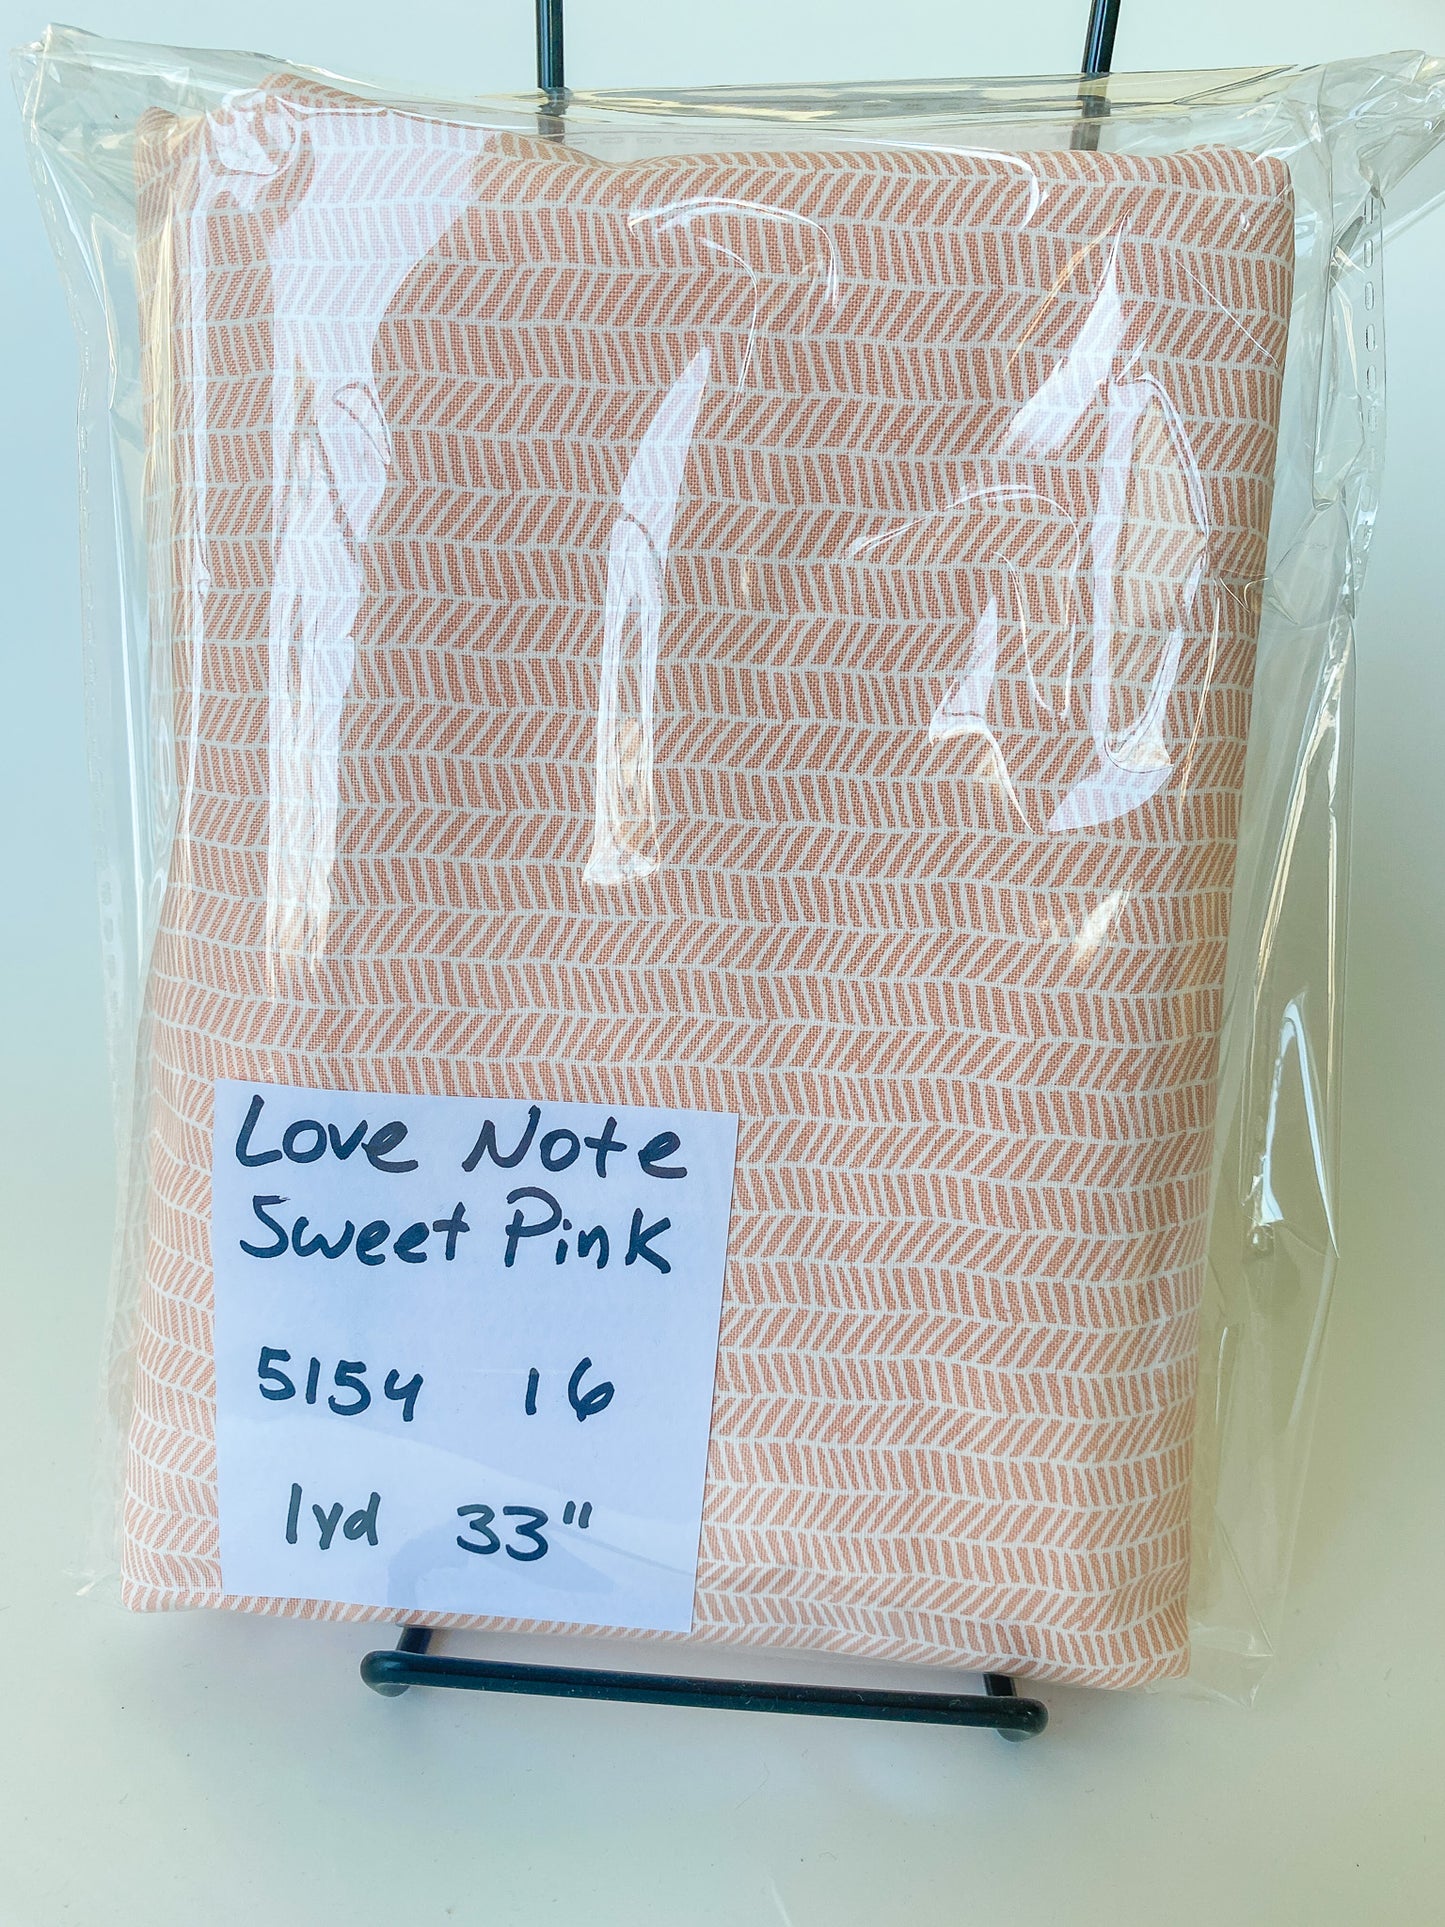 Love Note Sweet Pink- 1 yd 33" Remnant